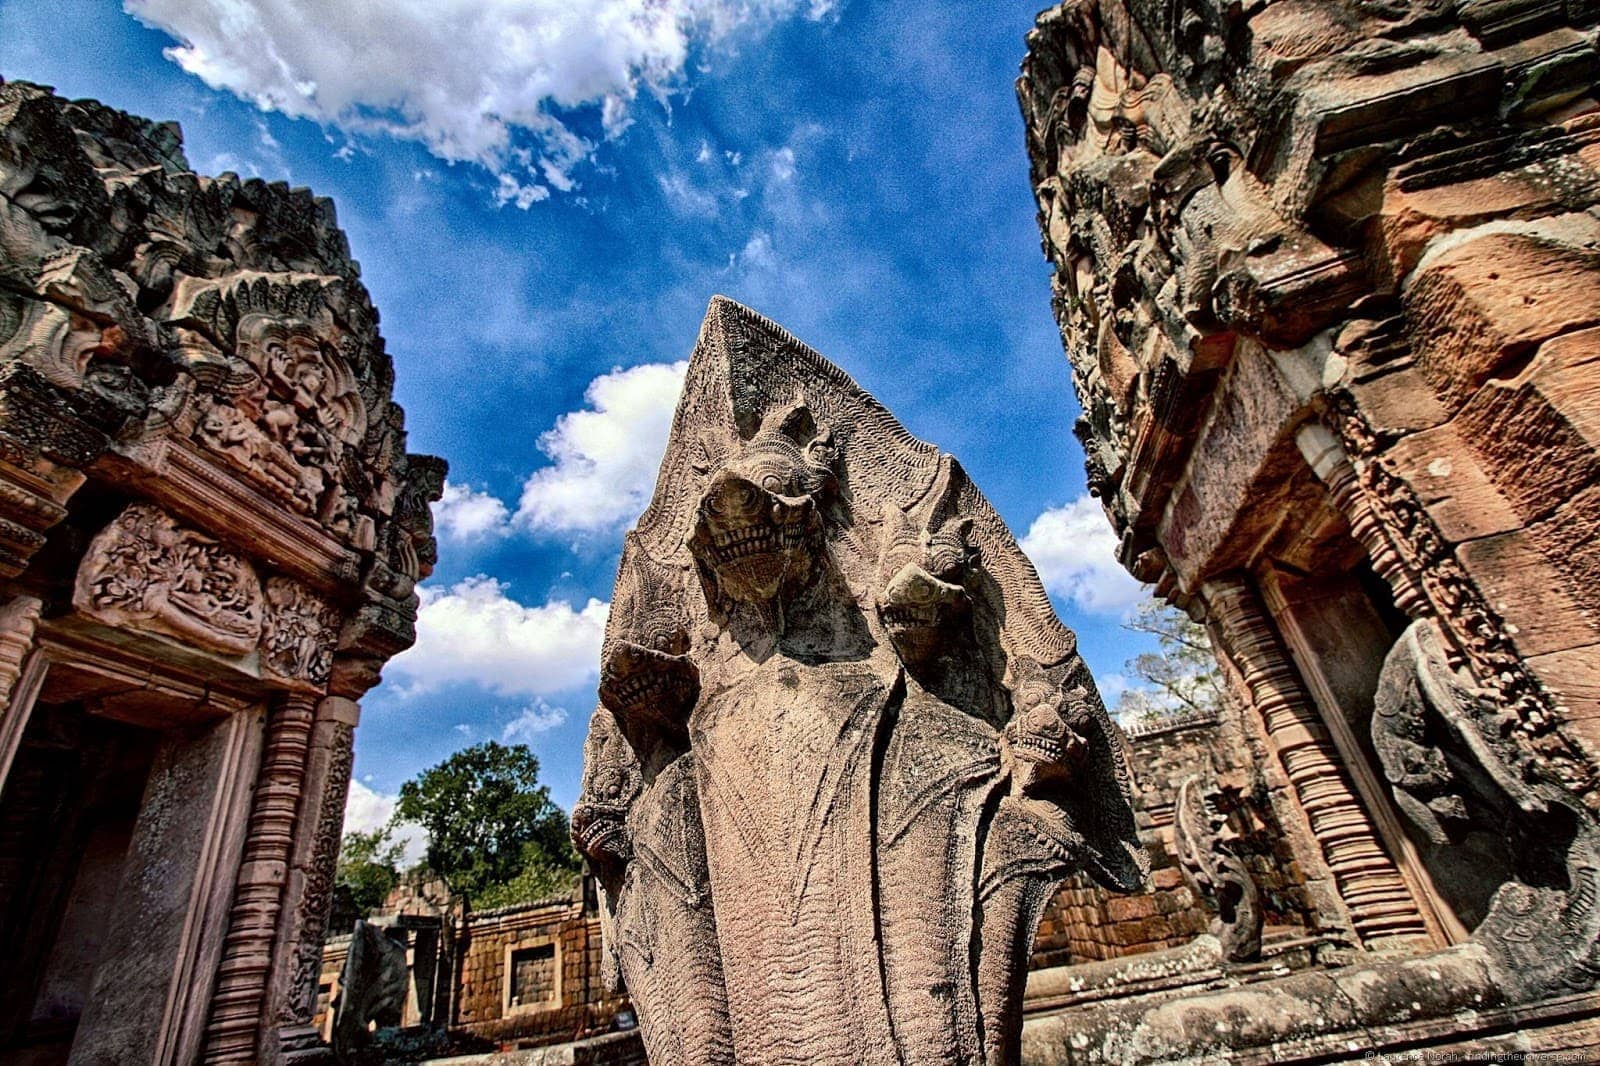 The Temple on a Volcano: Phanom Rung, Thailand